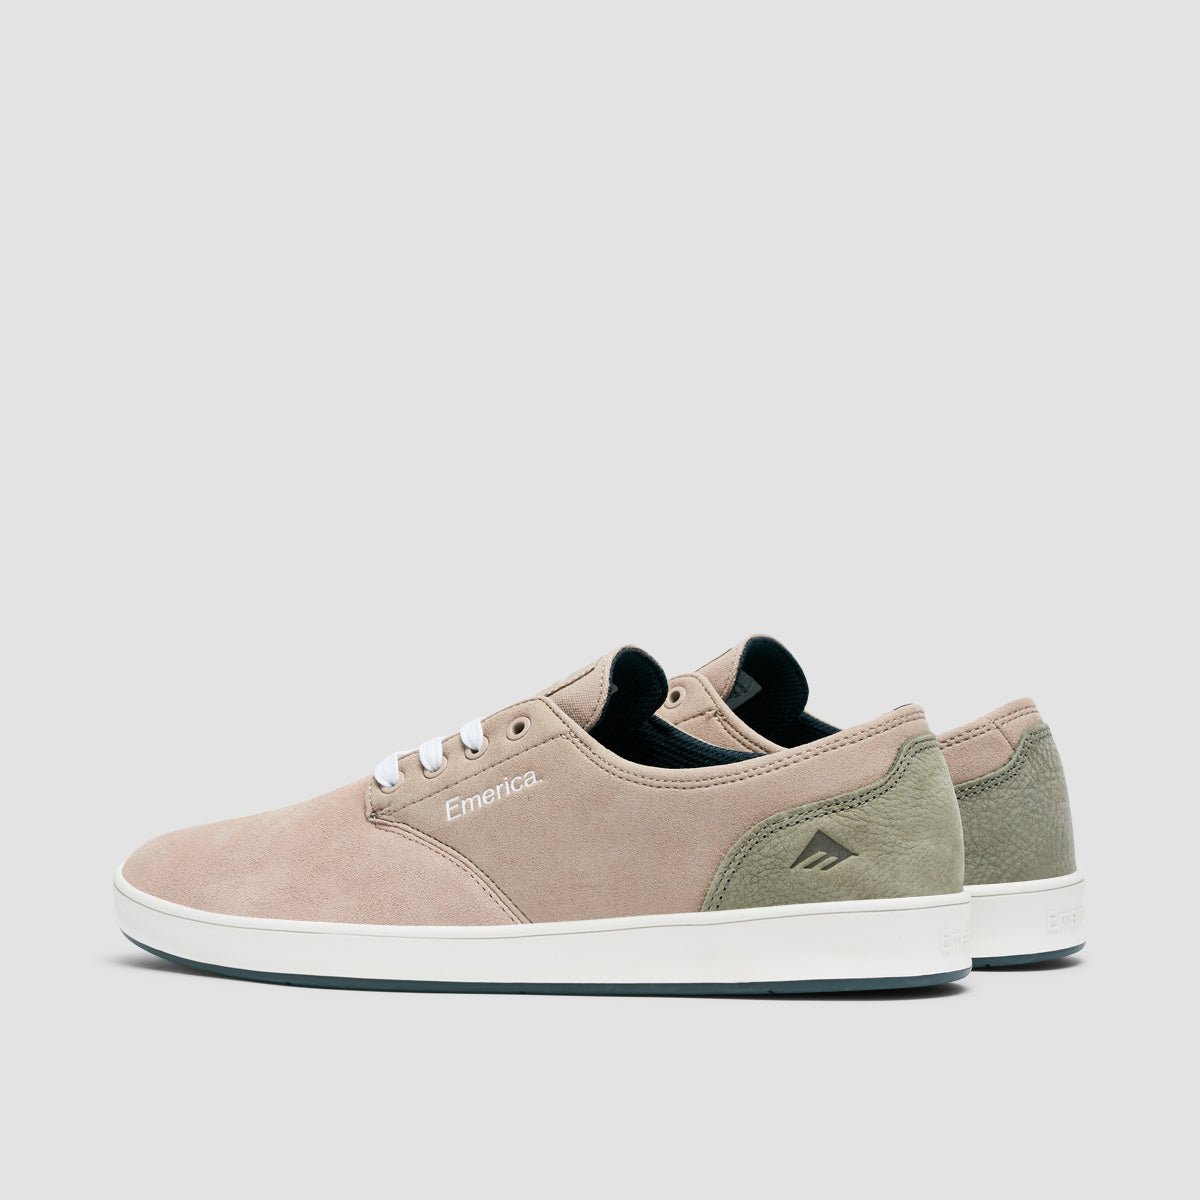 Emerica The Romero Laced Shoes Beige/Grey/White